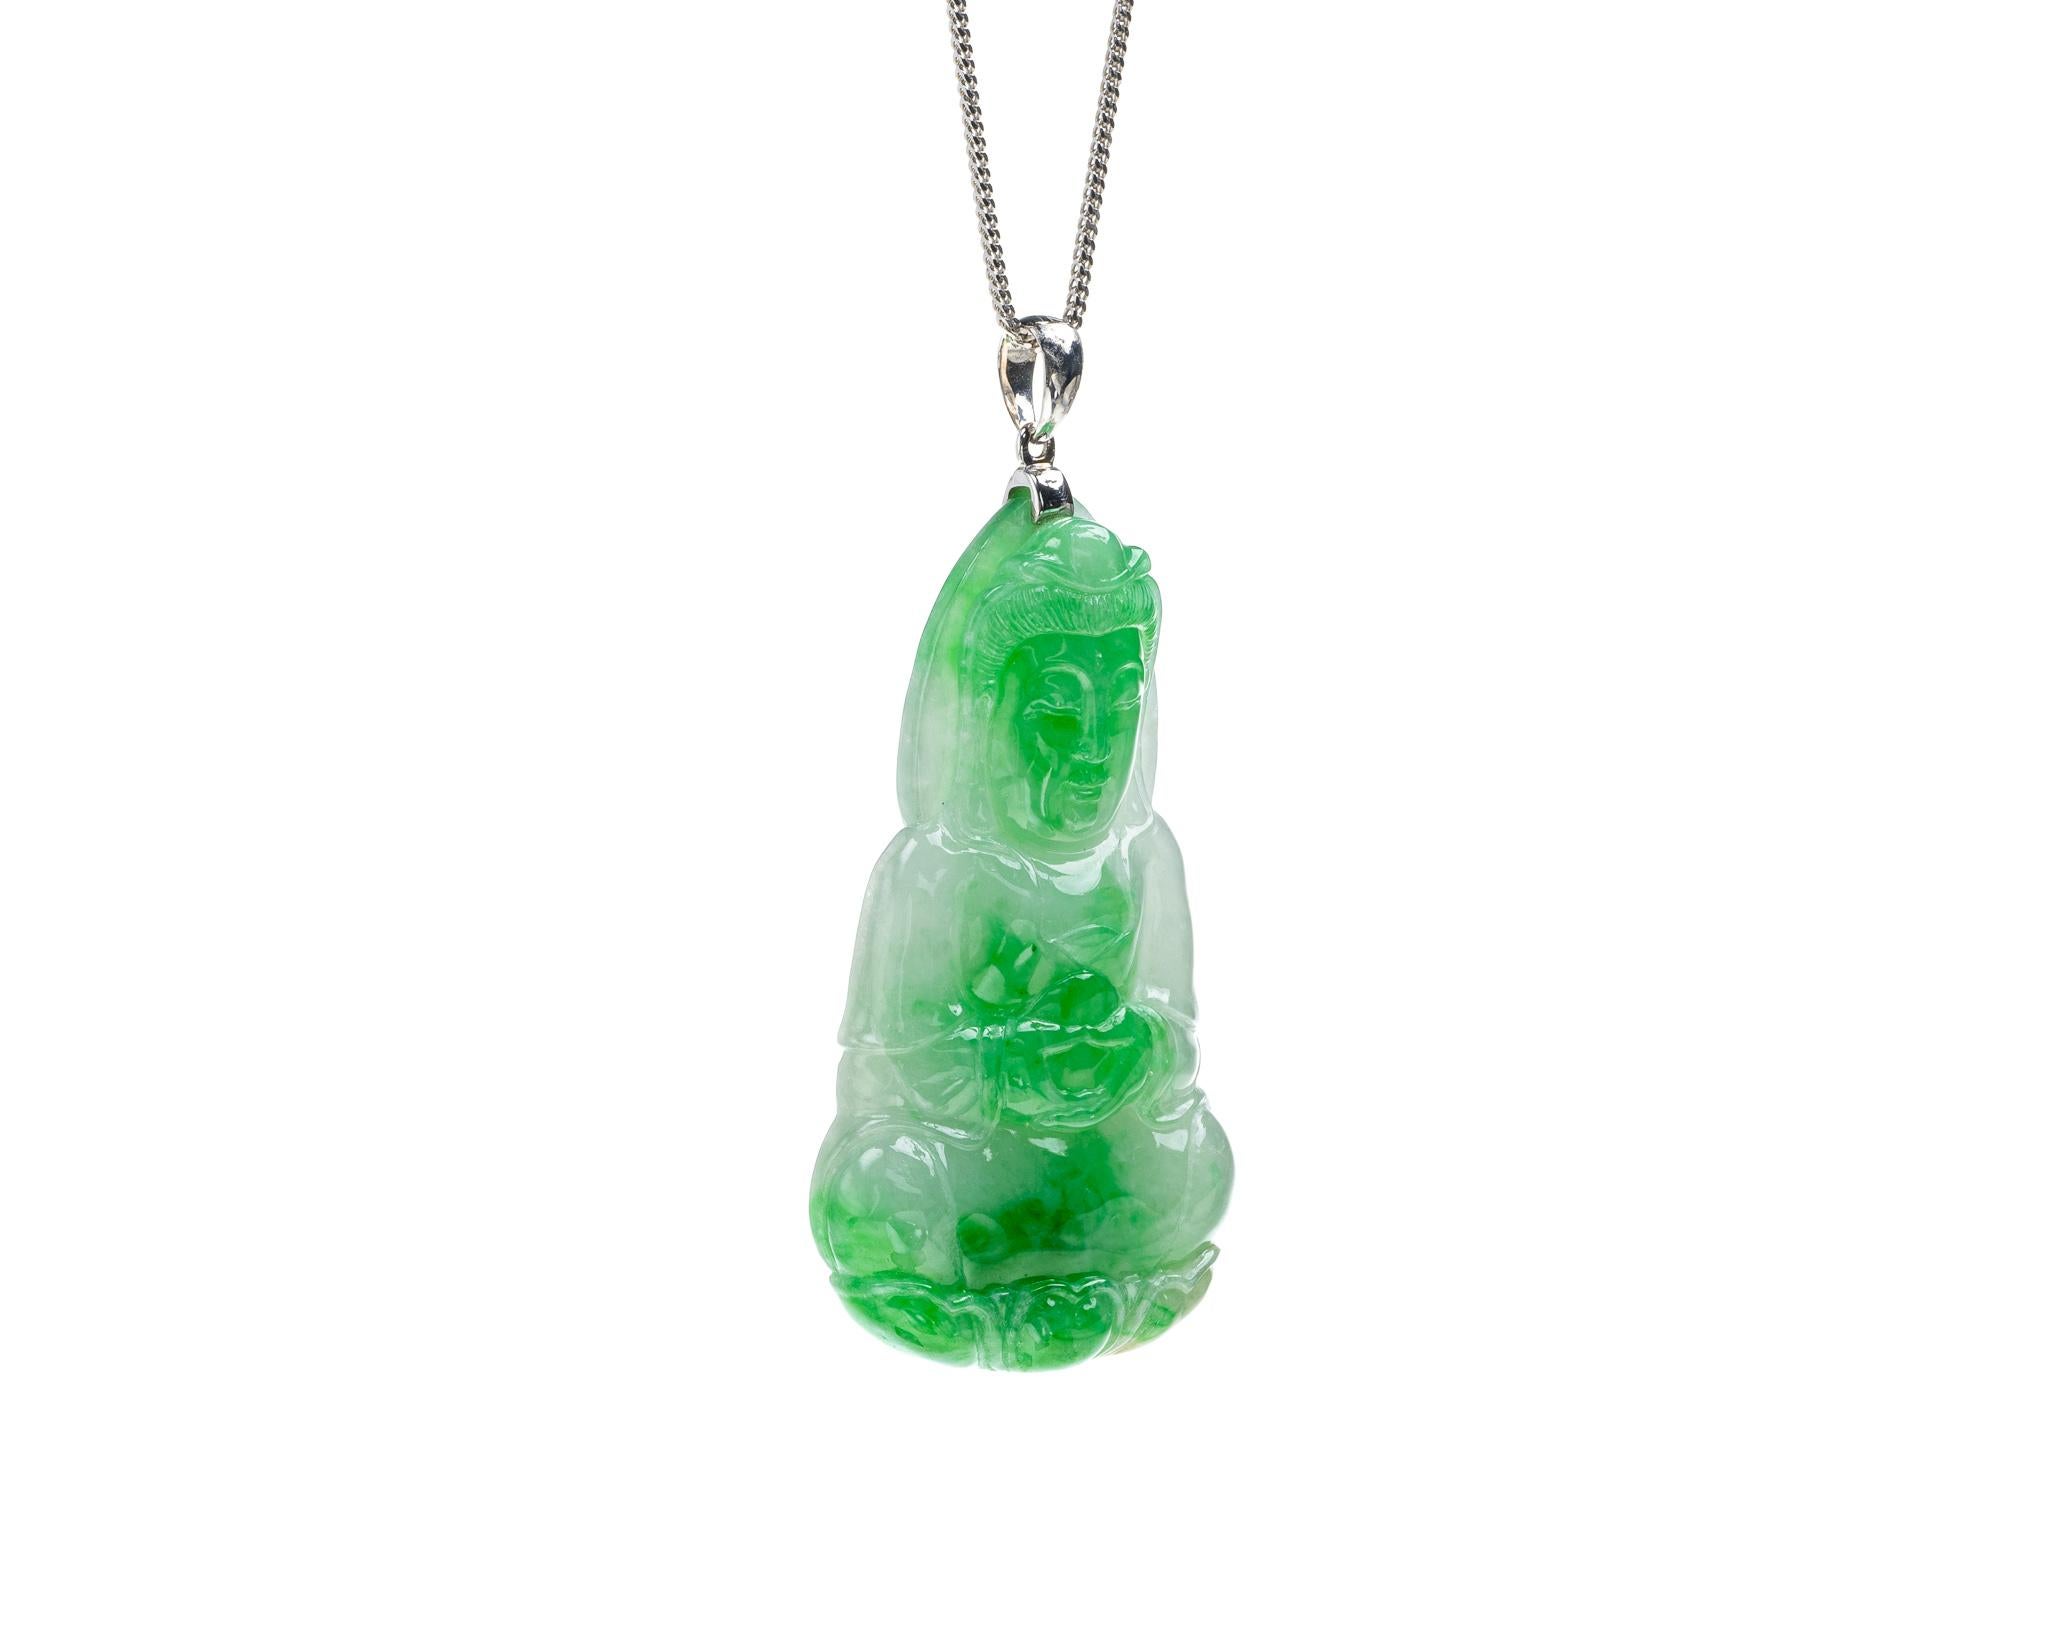 This is an all natural, untreated green jadeite jade carved Quan Yin god pendant set on an 18K white gold bail.  The carved Quan Yin god symbolizes compassion and protection 

It measures 1.07 inches (27.3 mm) x 1.98 inches (50.4 mm) with thickness